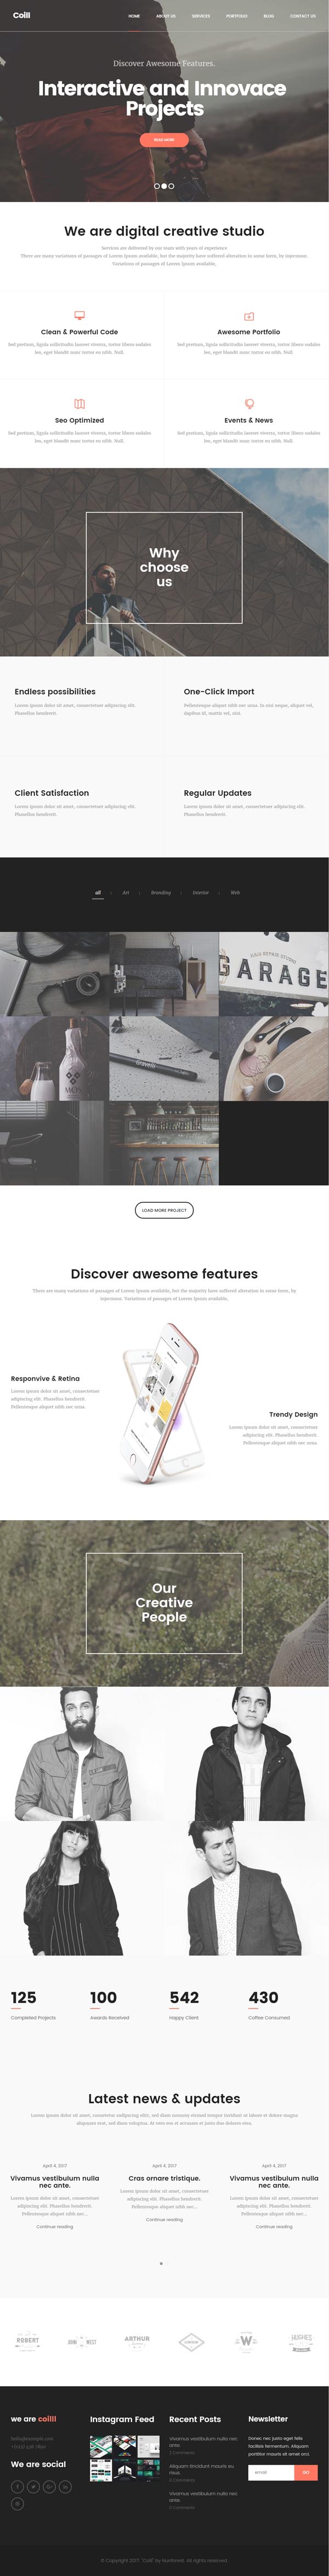 Coill | Business & Agency WordPress Theme